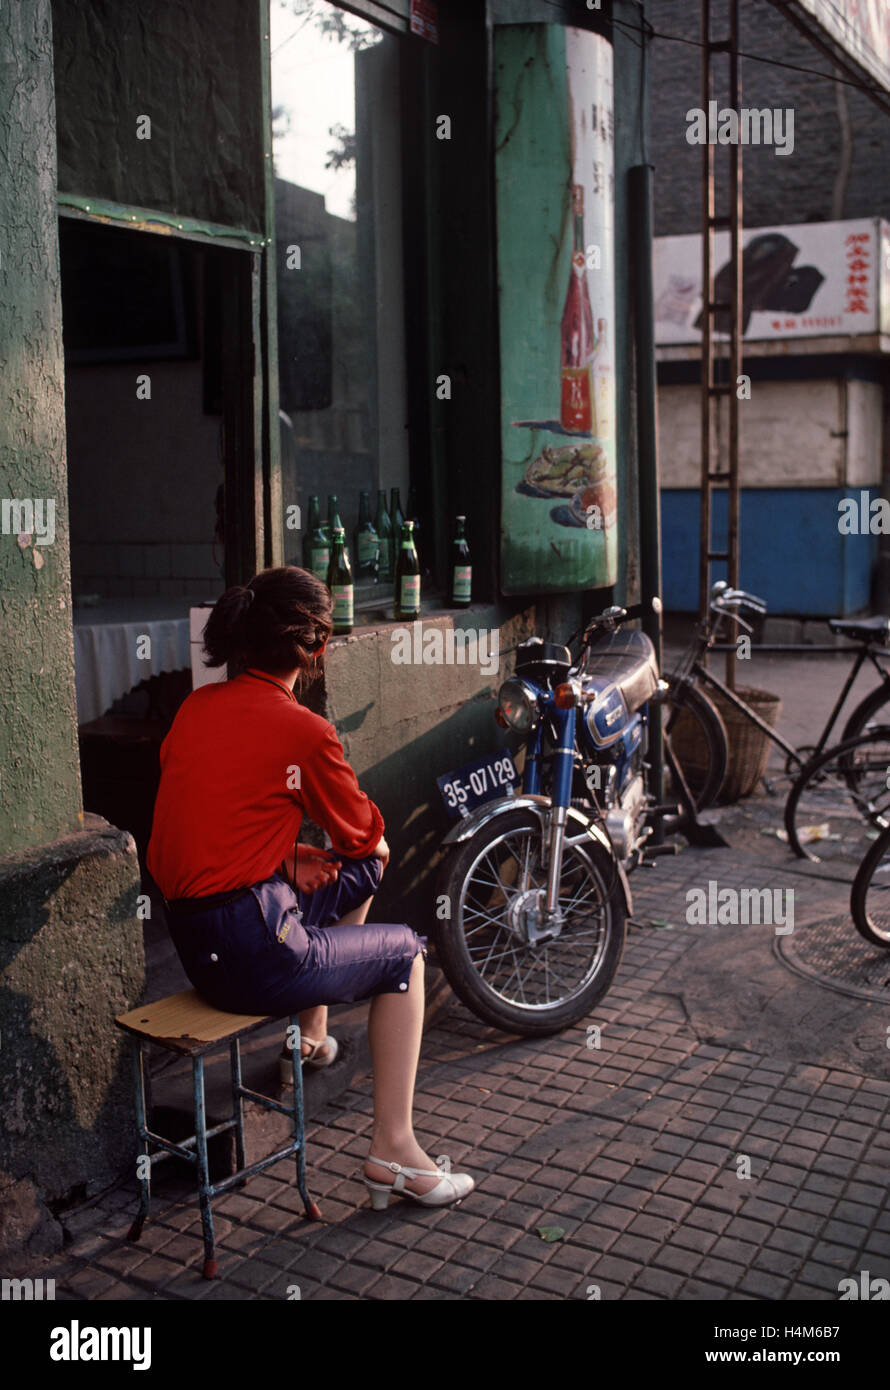 Chinese woman sitting in front of restaurant bar with food and drink painted advertising sign in Harbin, Heilongjiang Province, China Stock Photo